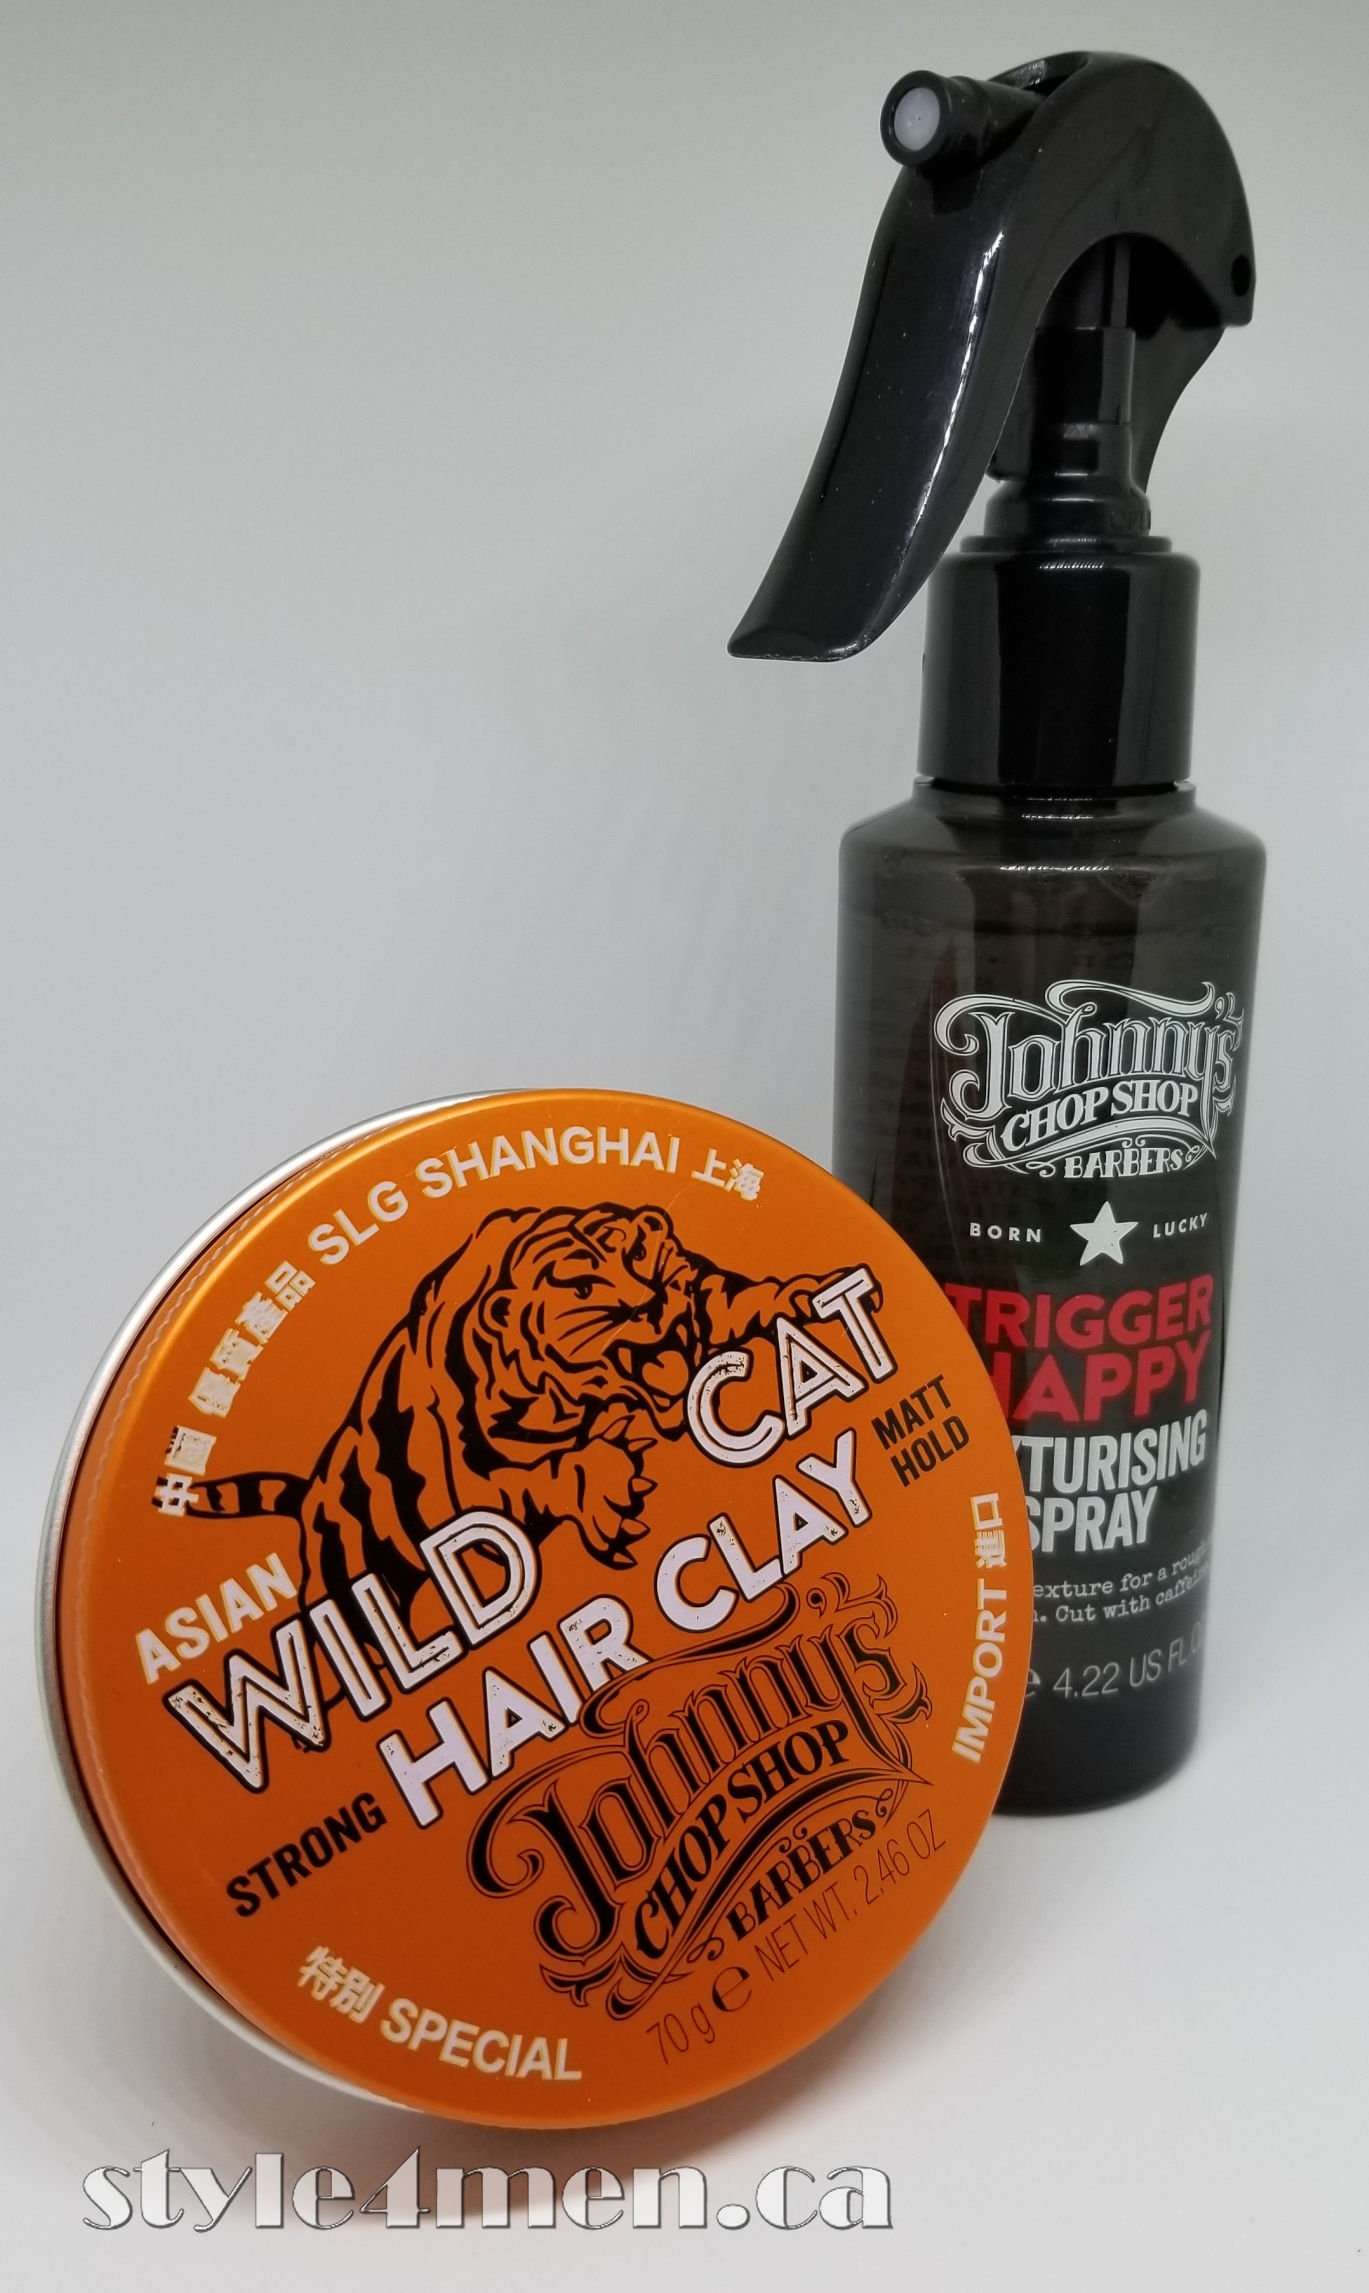 Johnny’s Chop Shop Wild Cat Hair Clay and Trigger Happy Spray